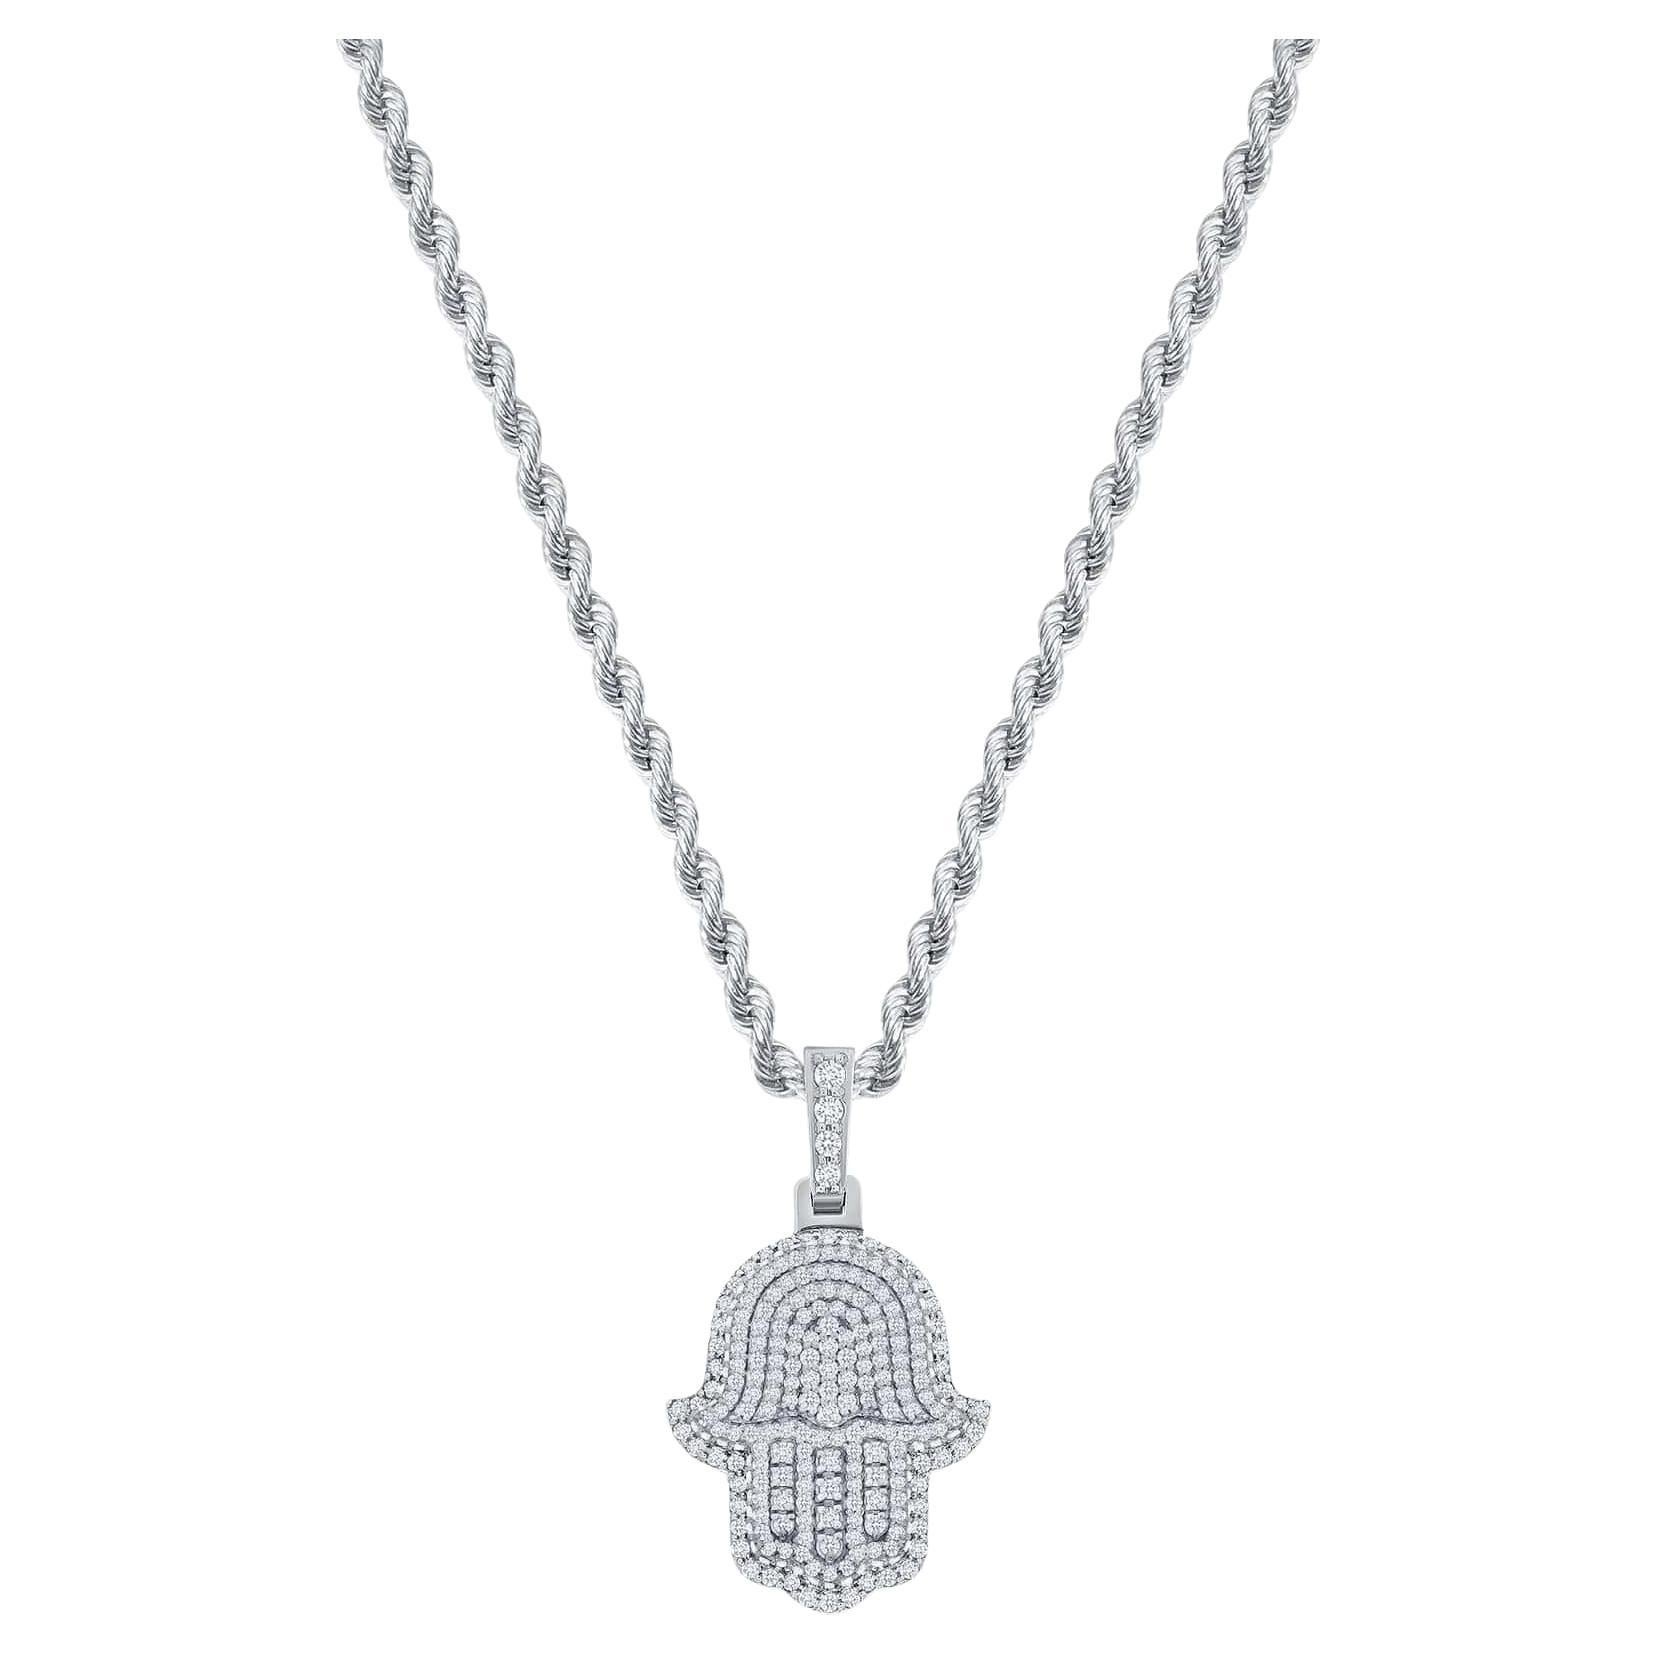 This Hamsa diamond necklace provides both a spiritual and fashionable on trend look.
 
Necklace Information
Metal : 14k Gold
Diamond Cut : Round
Total Diamond Carats : 2ttcw
Diamond Clarity : VS-SI
Diamond Color : F-G
Necklace Length : 18